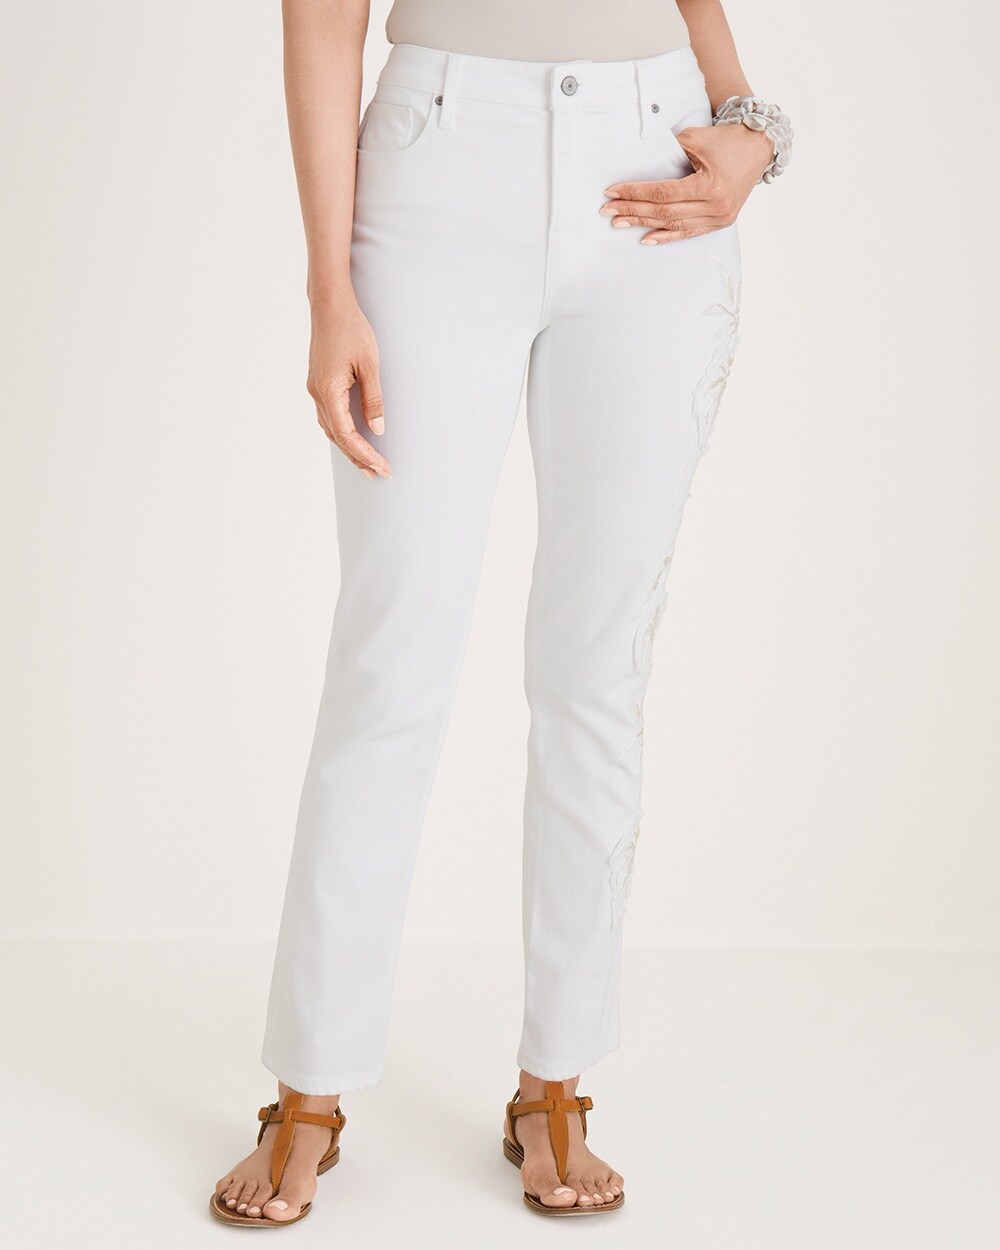 So Slimming Beaded Embroidered Girlfriend Ankle Jeans - Chico's